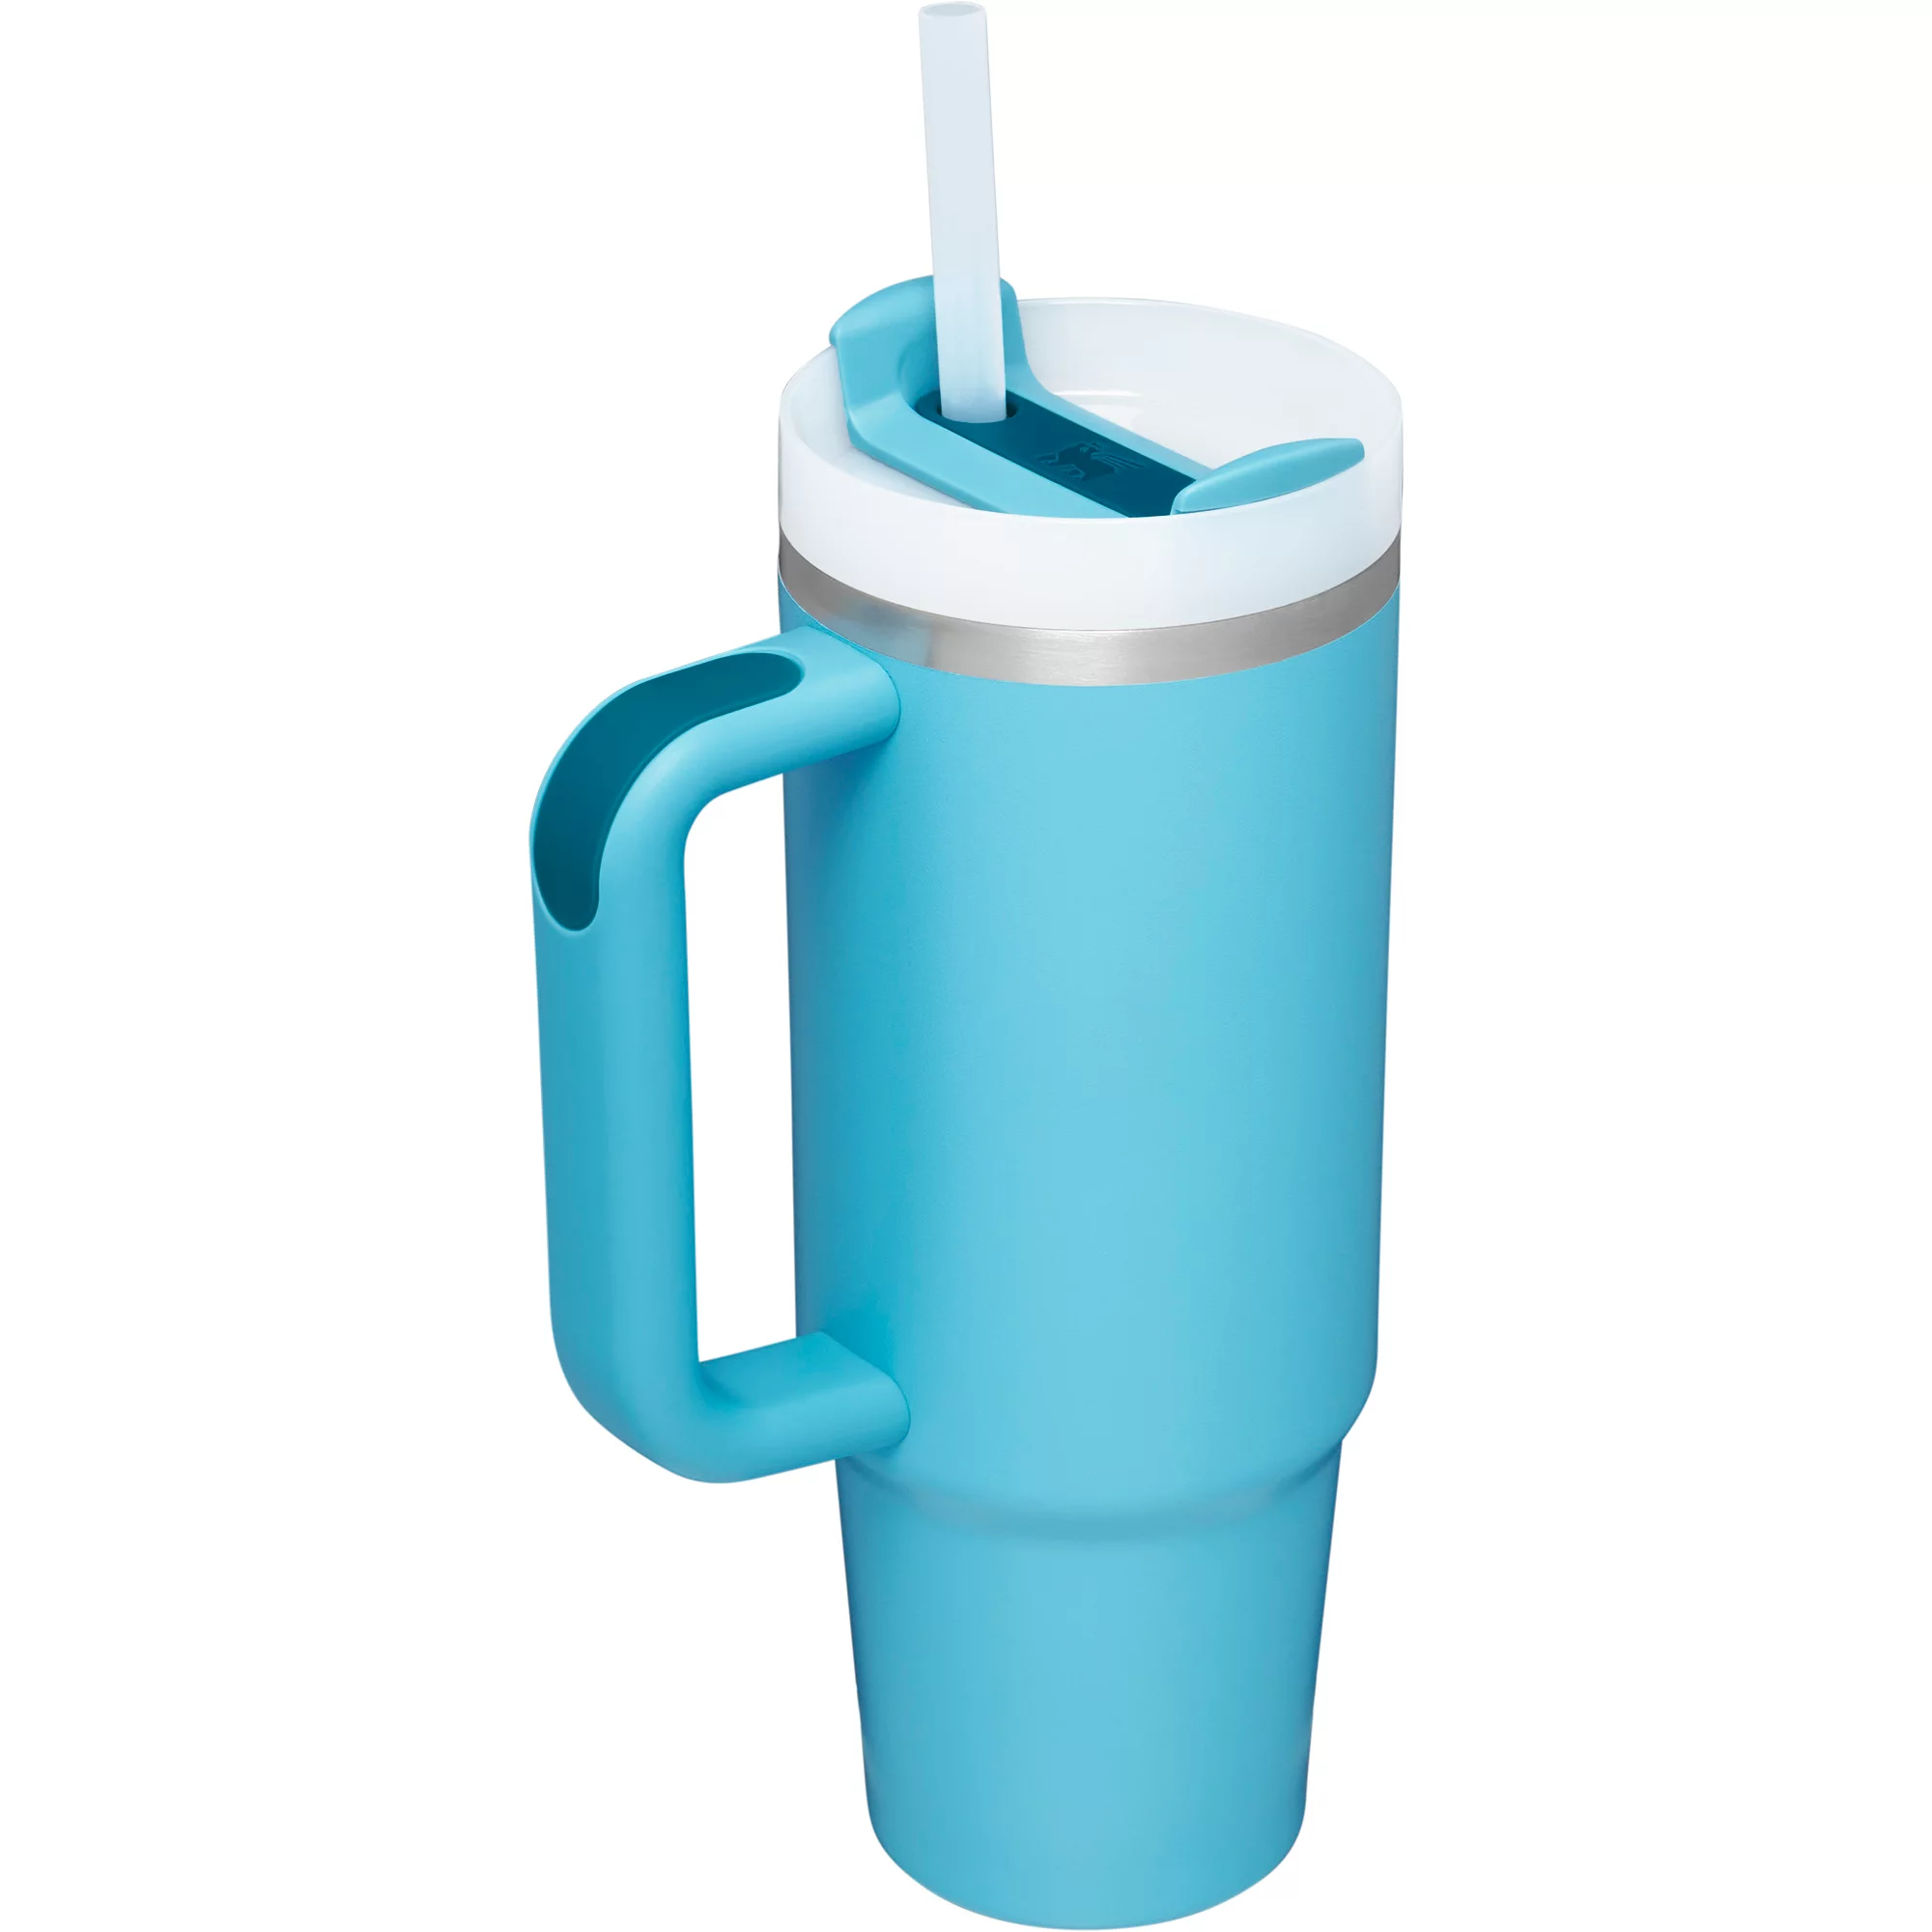 Stanley 30 oz. Quencher H2.0 FlowState Tumbler, Pool Blue